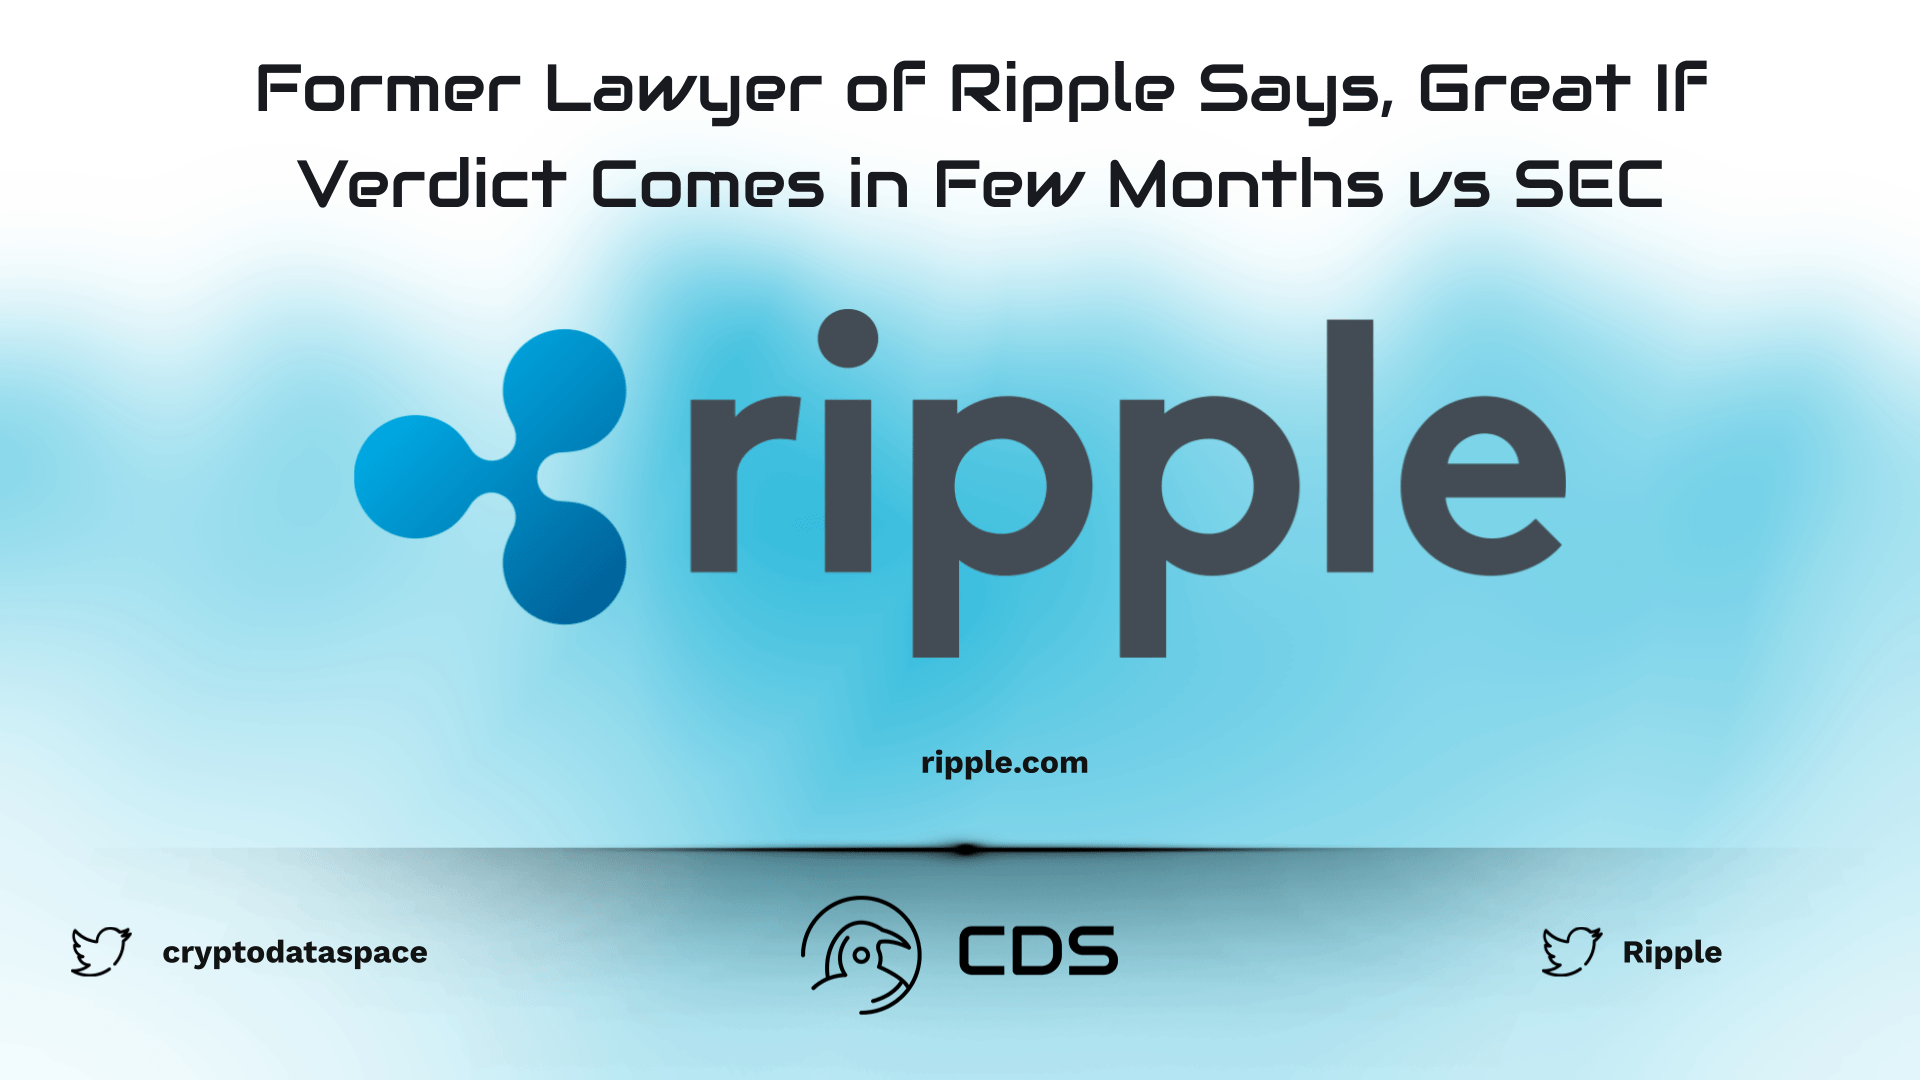 Former Lawyer of Ripple Says, Great If Verdict Comes in Few Months vs SEC